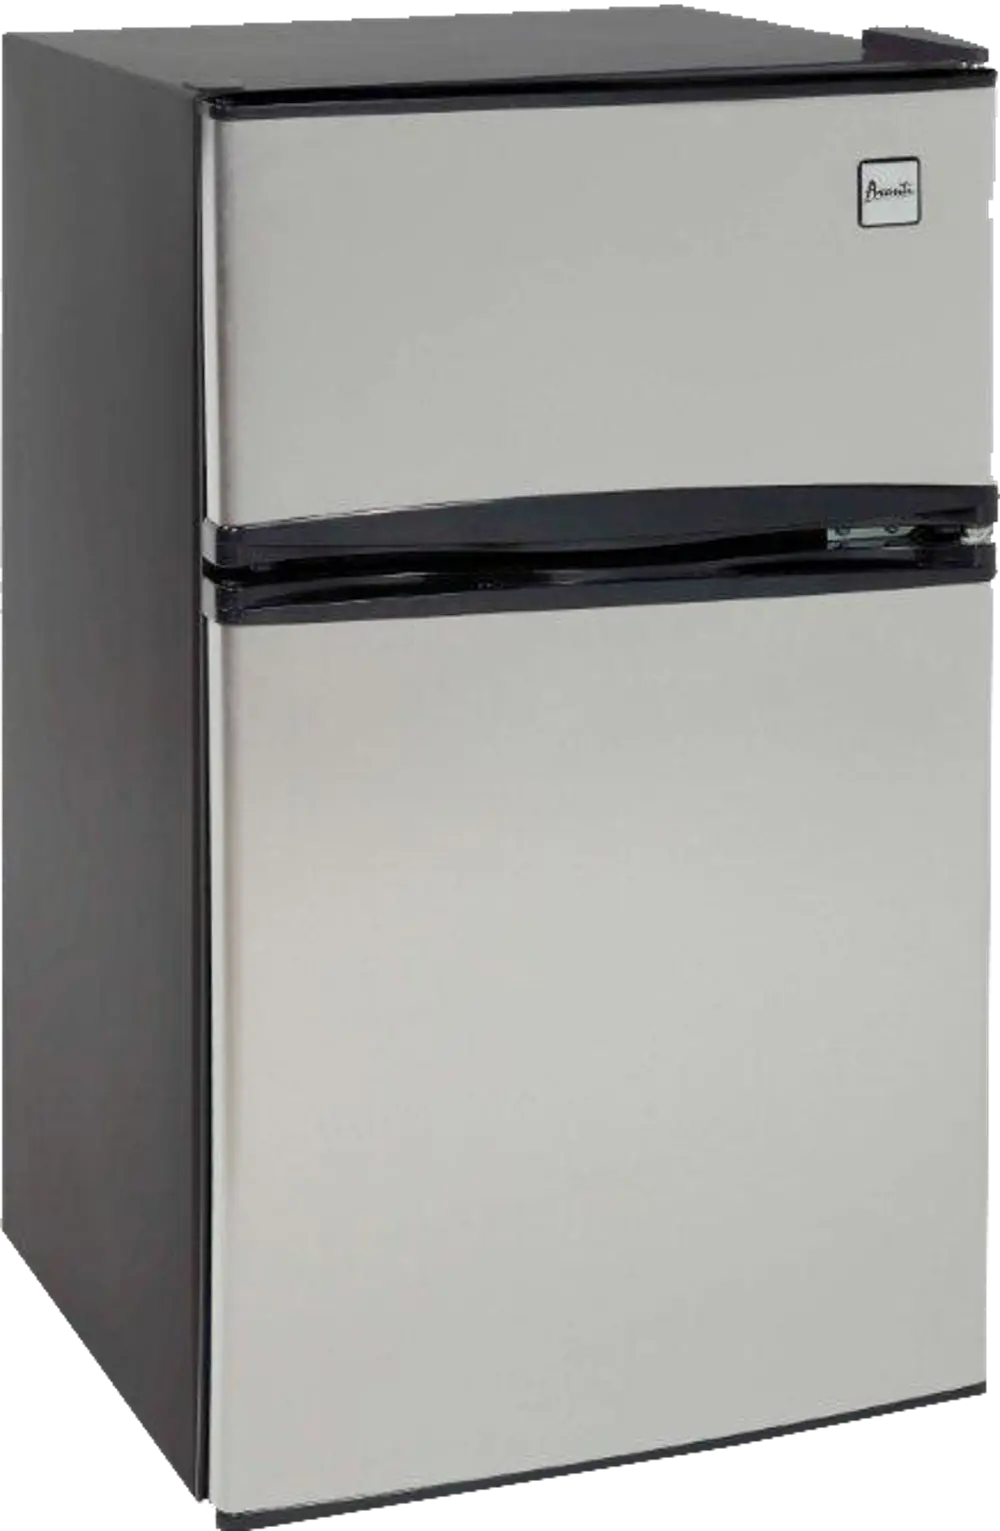 RA3136SST Avanti Stainless Steel and Black 3.1 cu. ft. Two Door Counter-height Compact Refrigerator-1